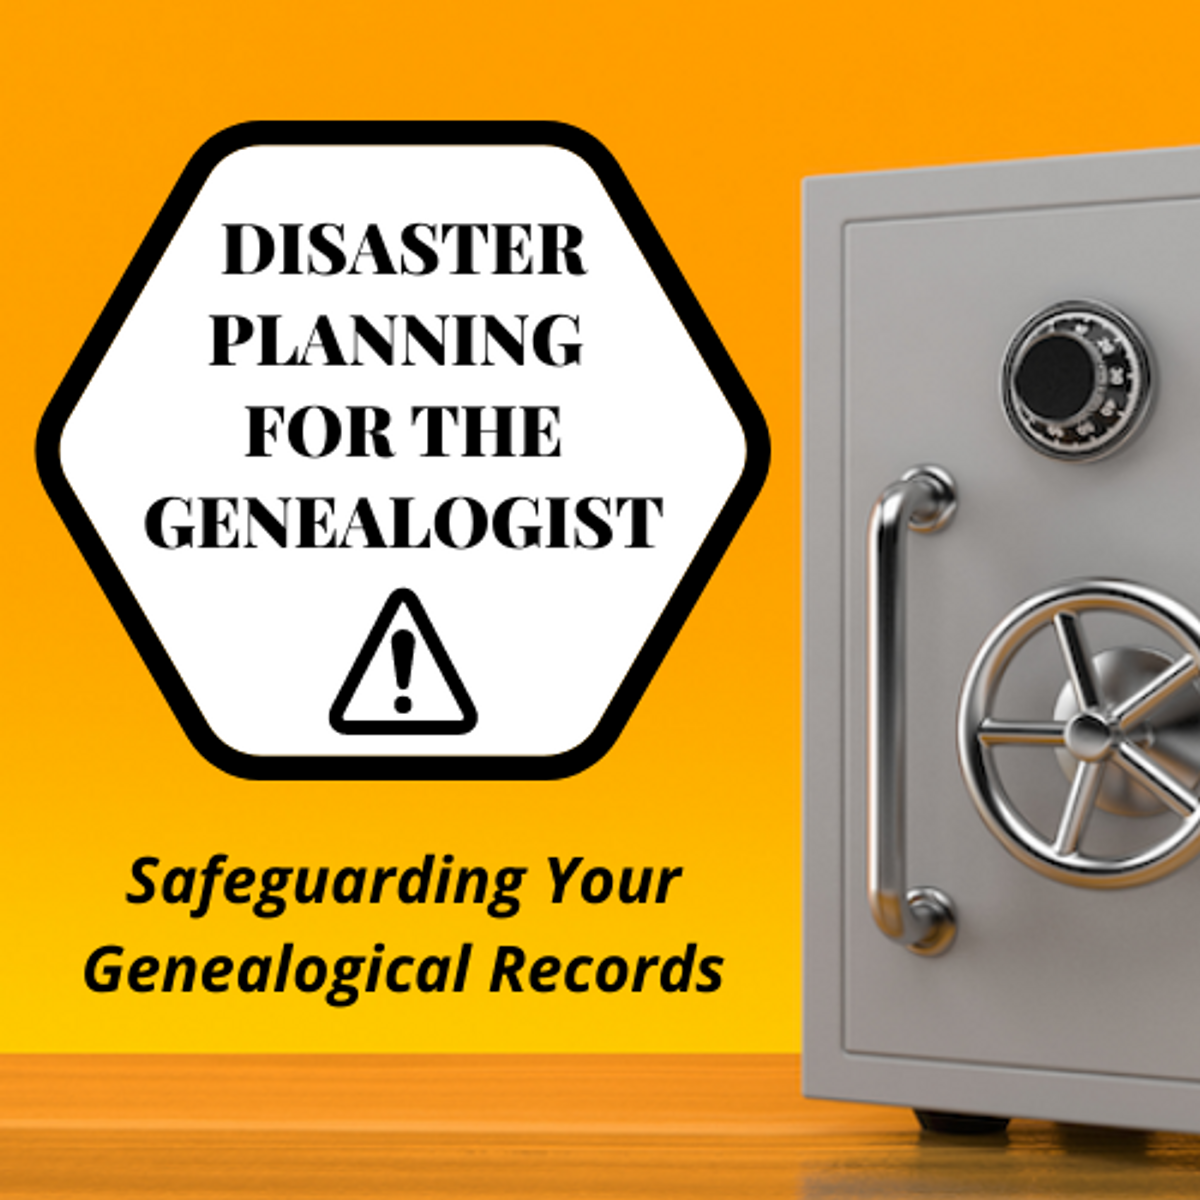 Lecture Hall - Disaster Planning for the Genealogist